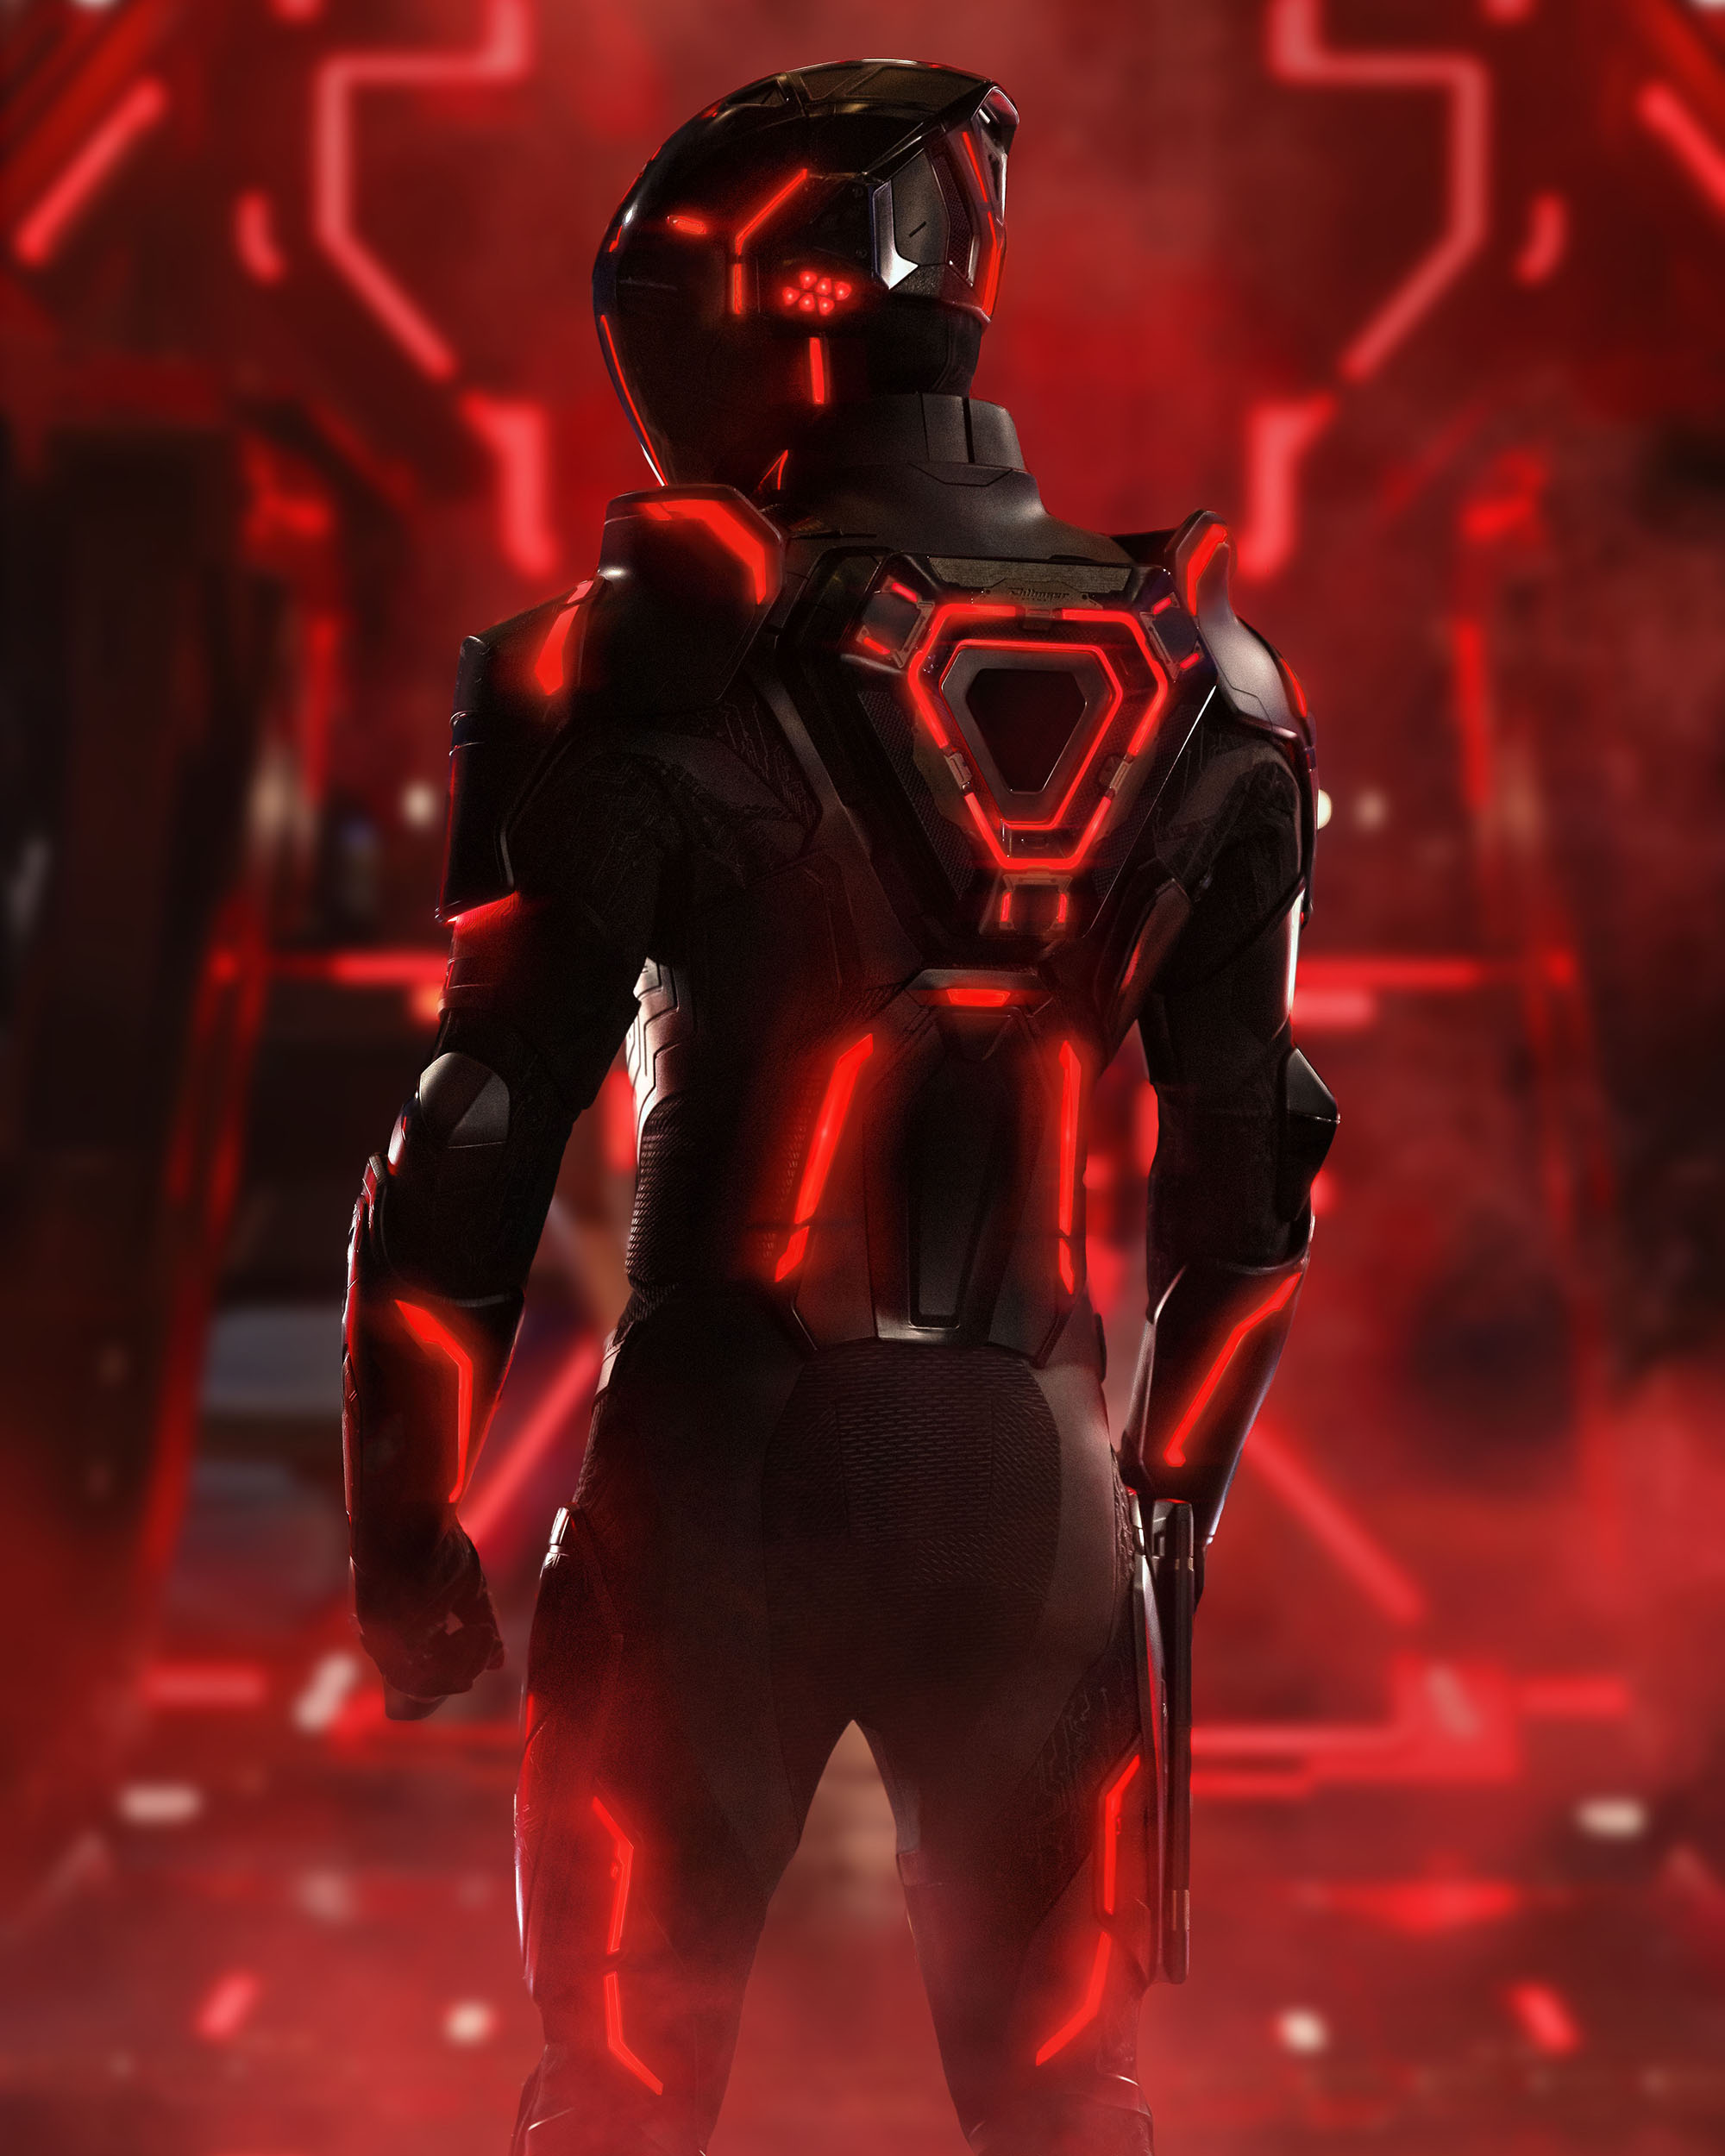 first look from Disney's 2025 live-action movie "Tron-Ares." We see a figure in black, Ares, dressed in a black suit and helmet. He is inside a computer world that is illuminated by a red light that contrasts in the background against his black suit.